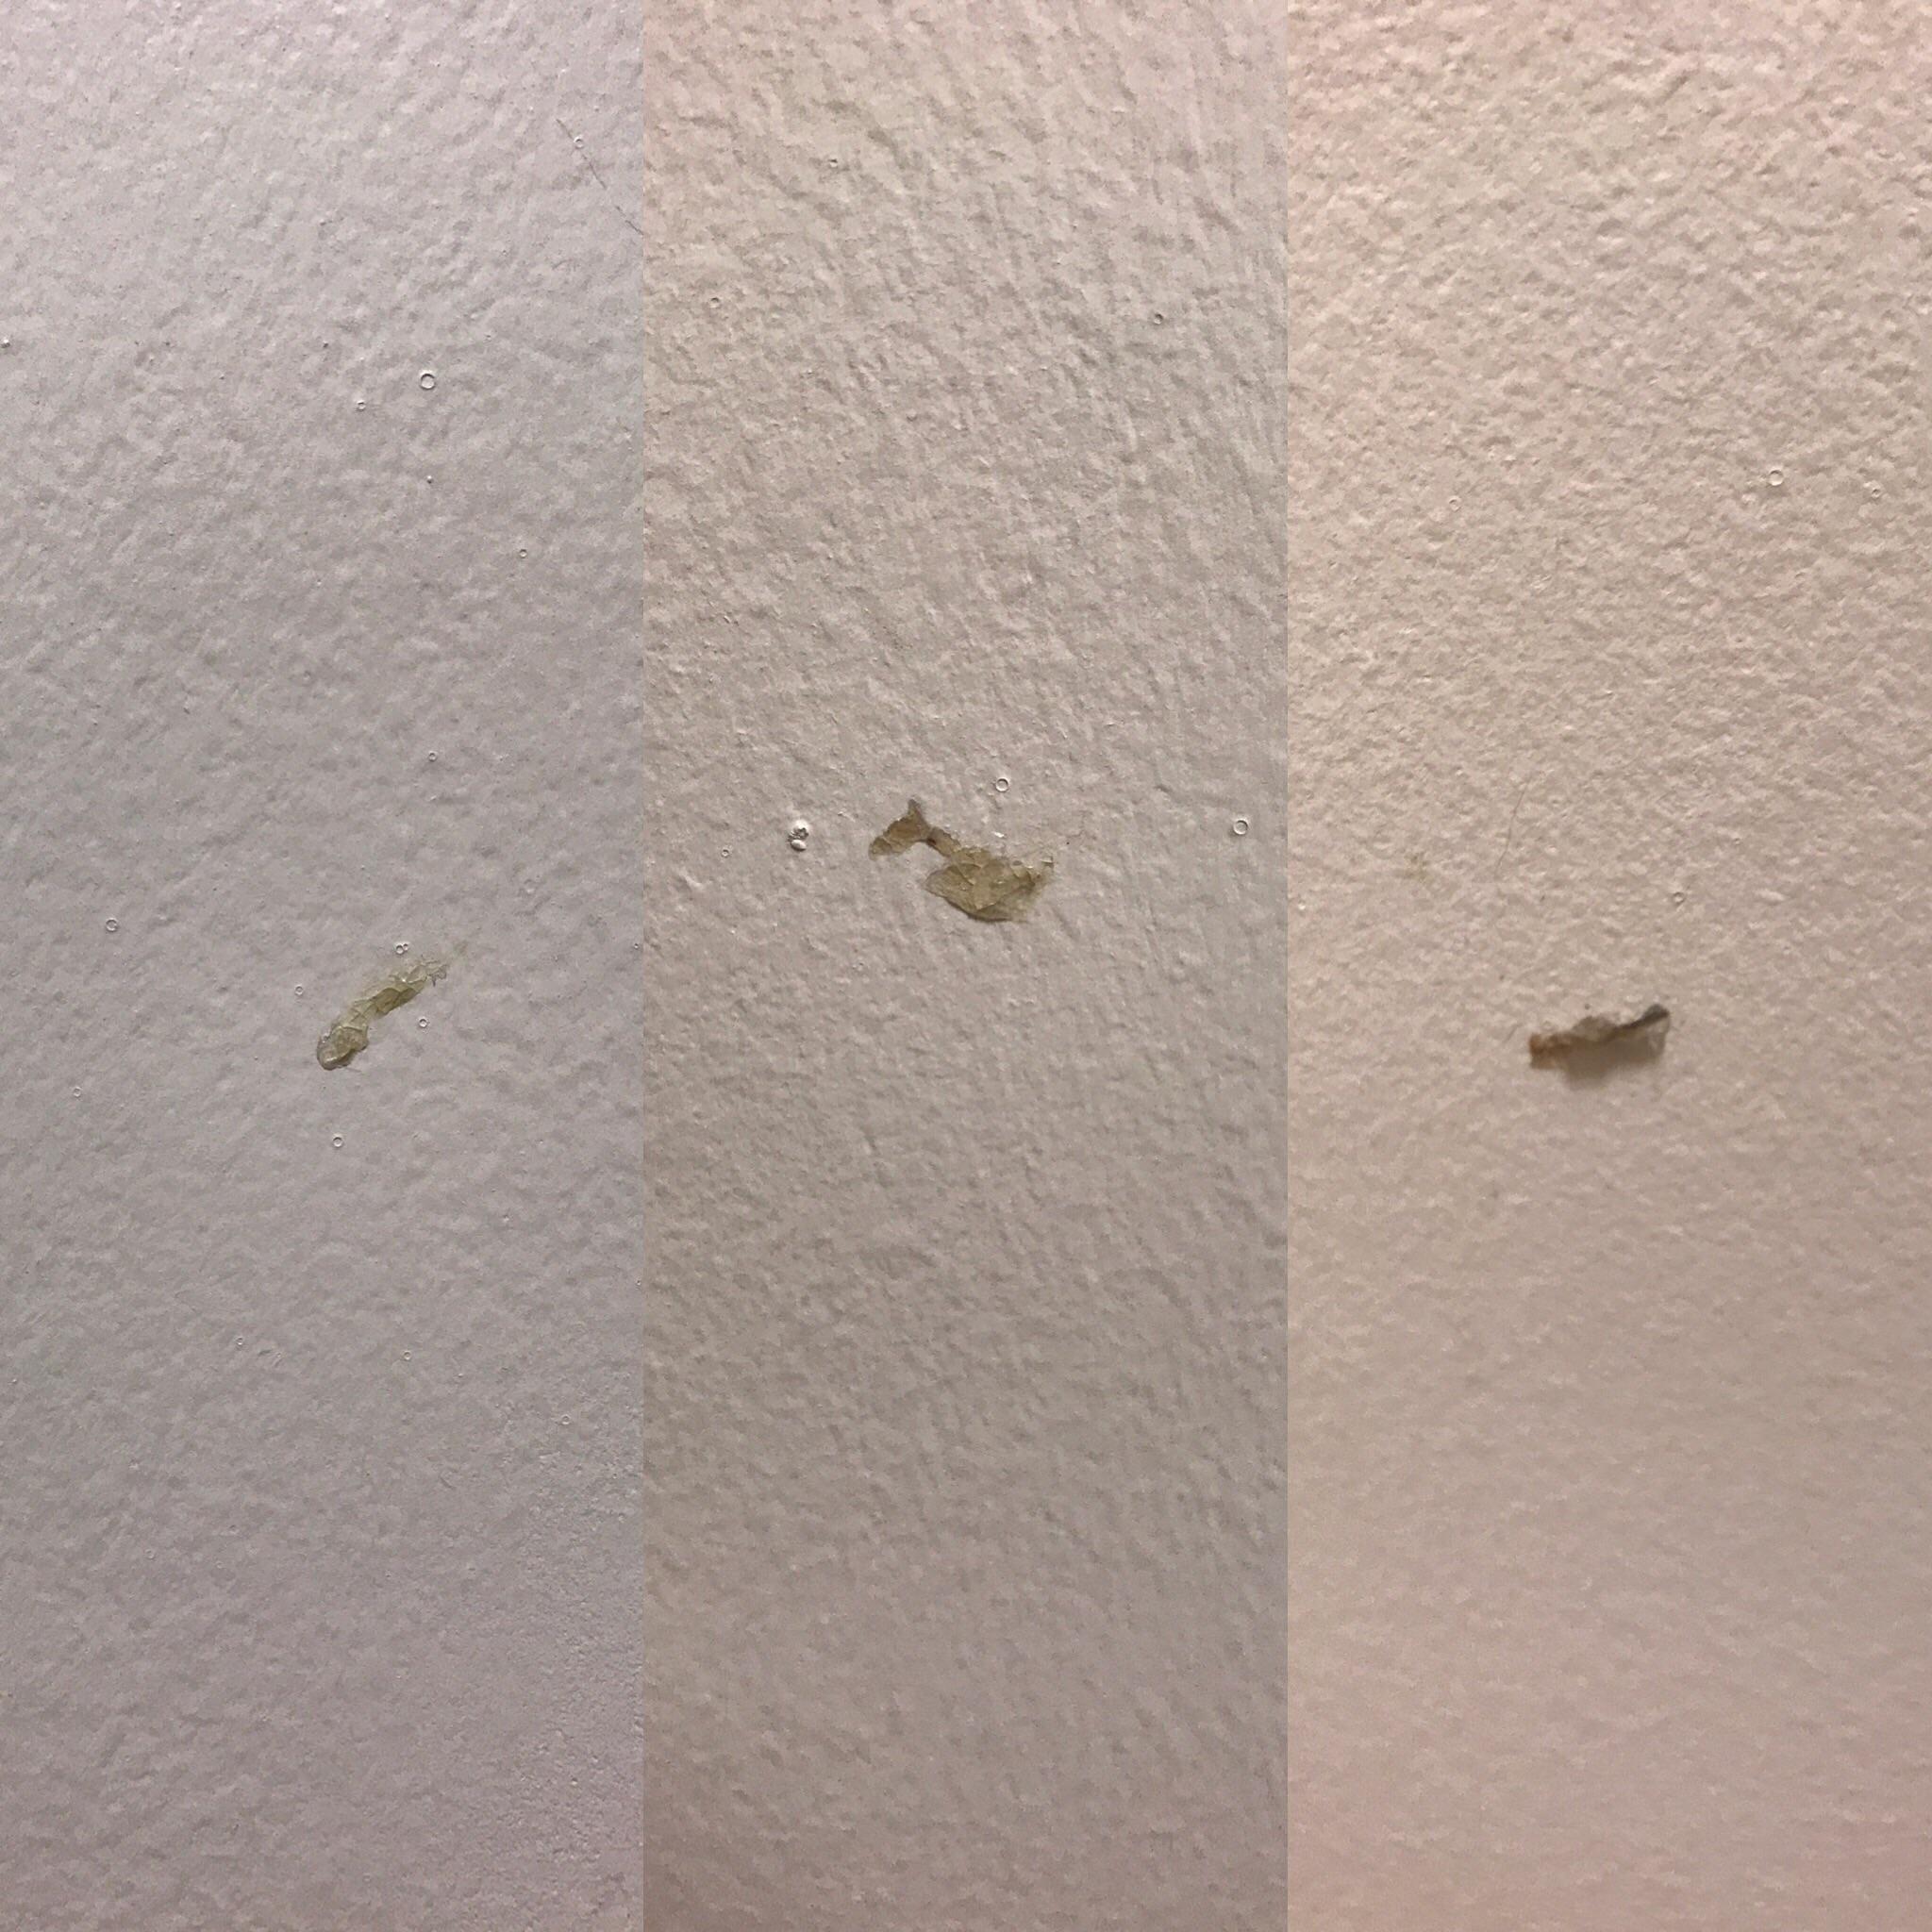 how to clean boogers off walls